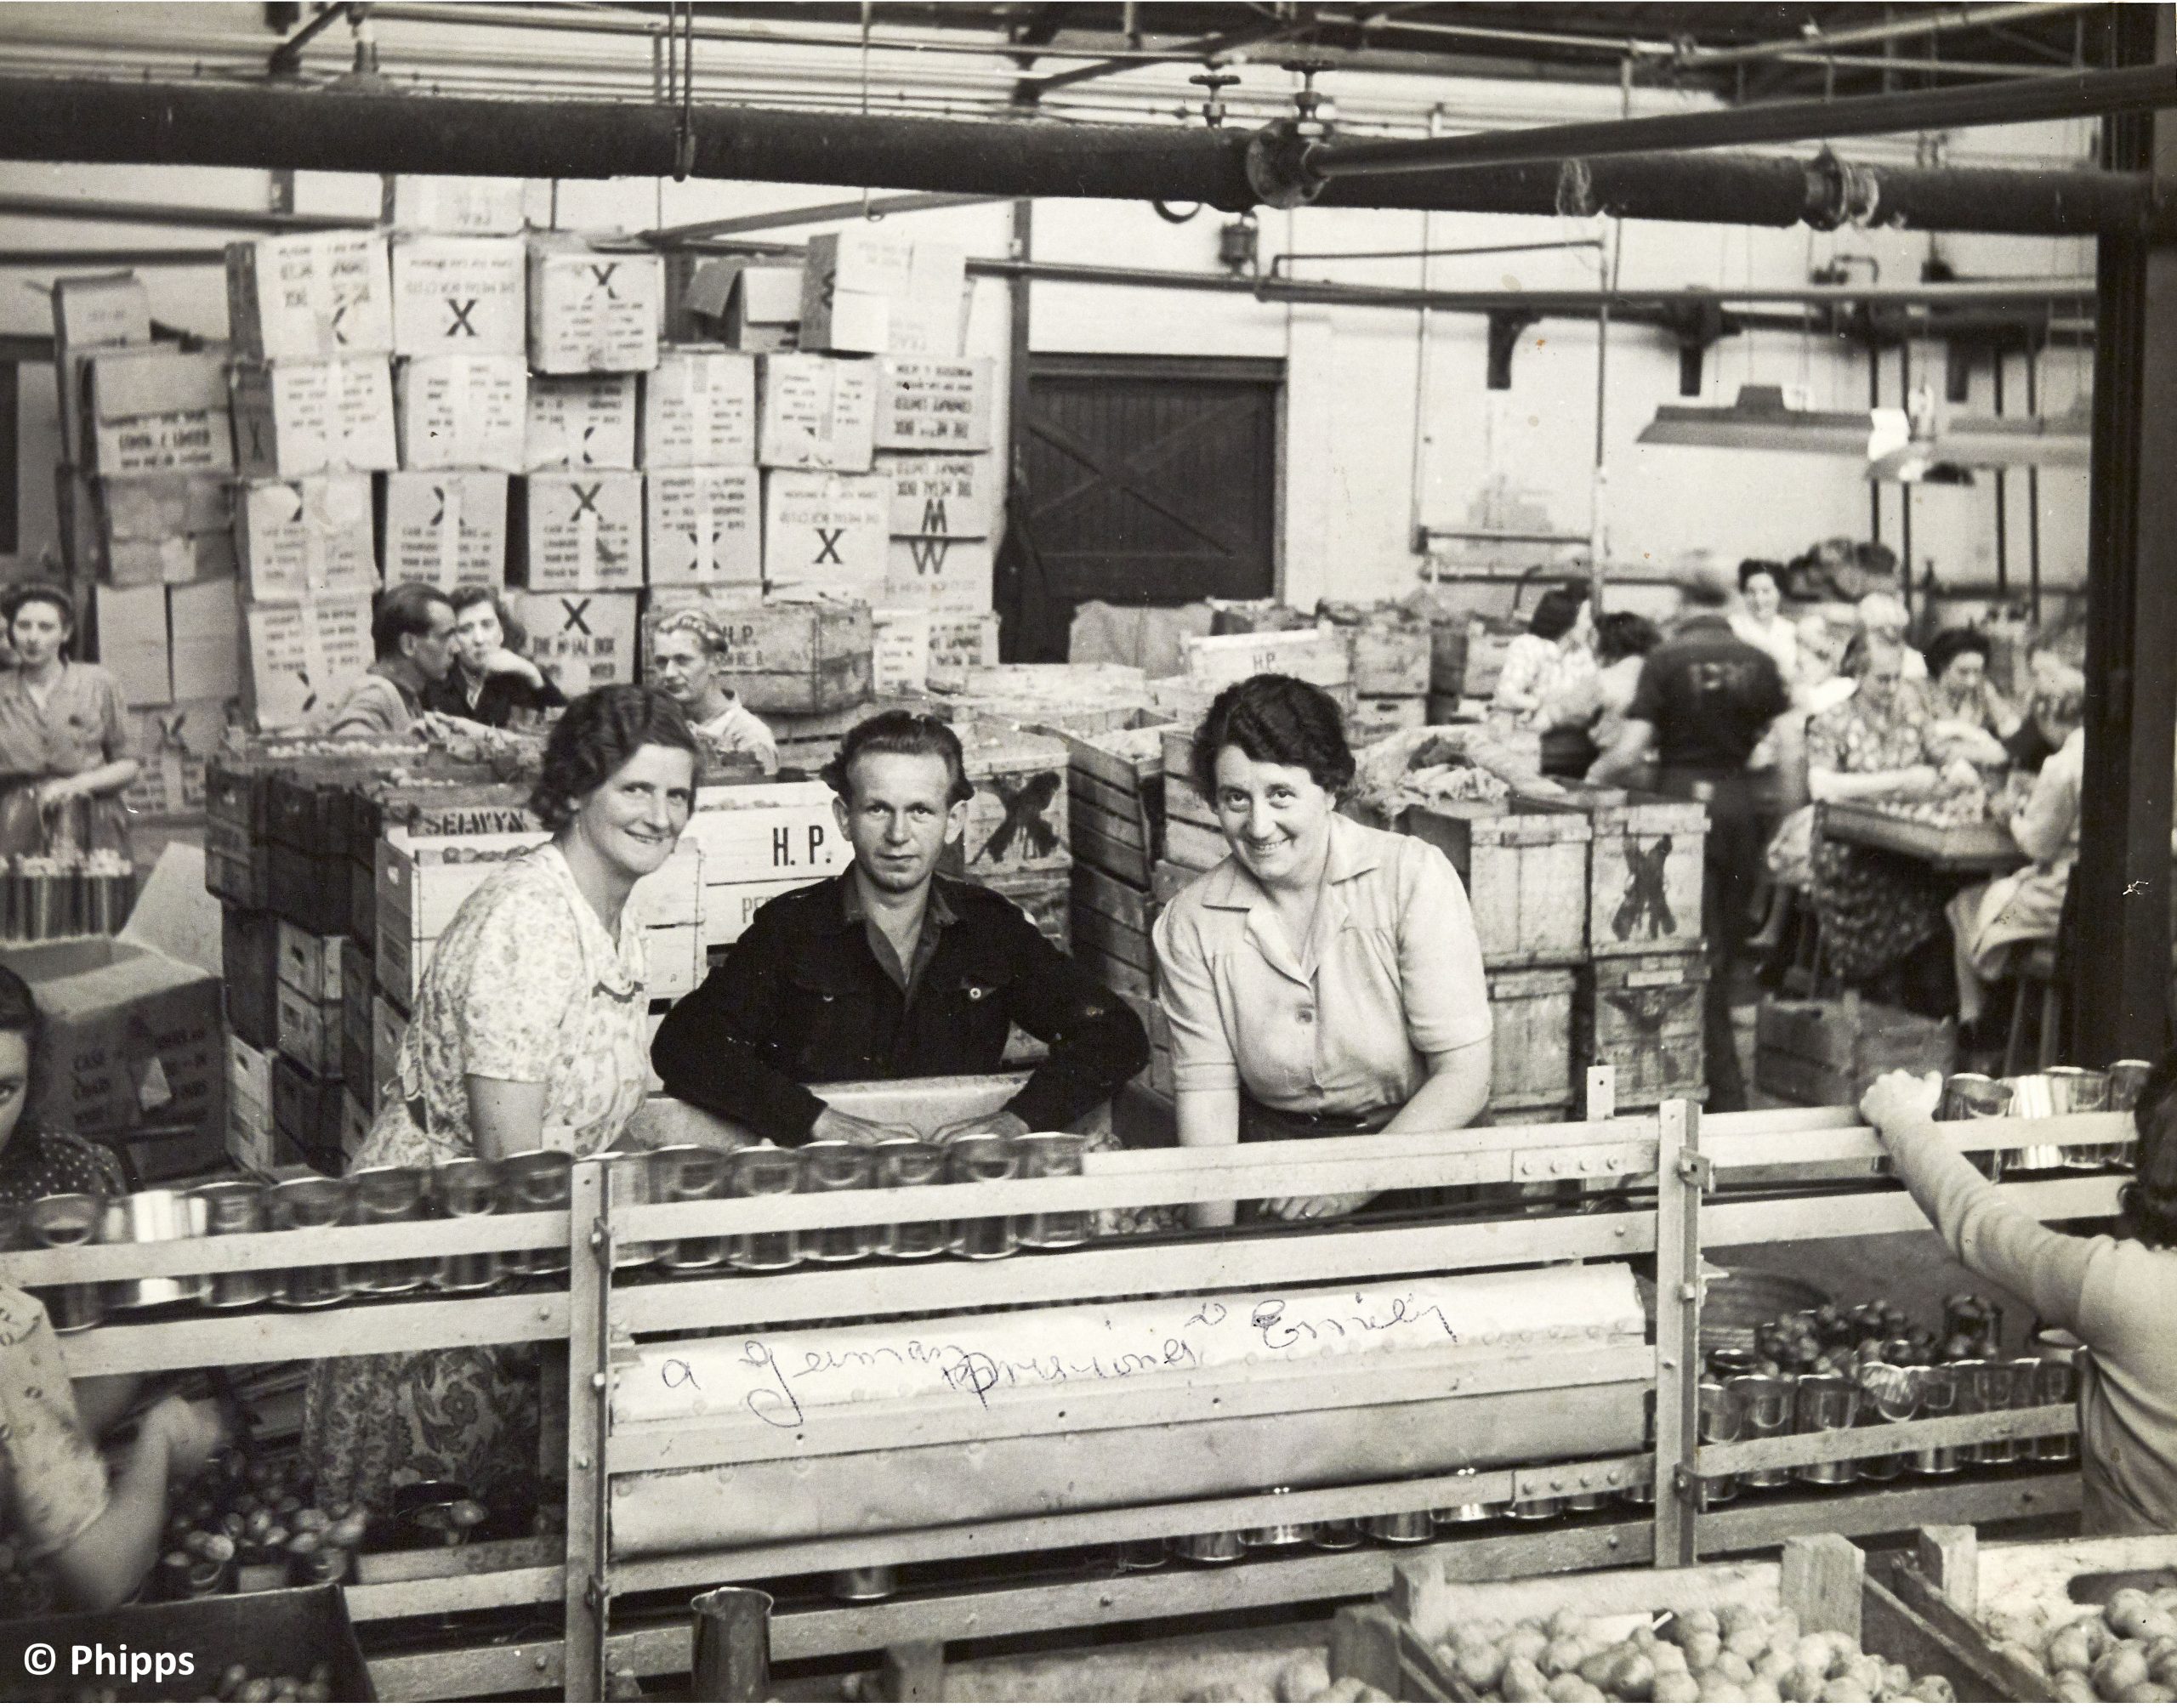 Inside Phipps canning factory